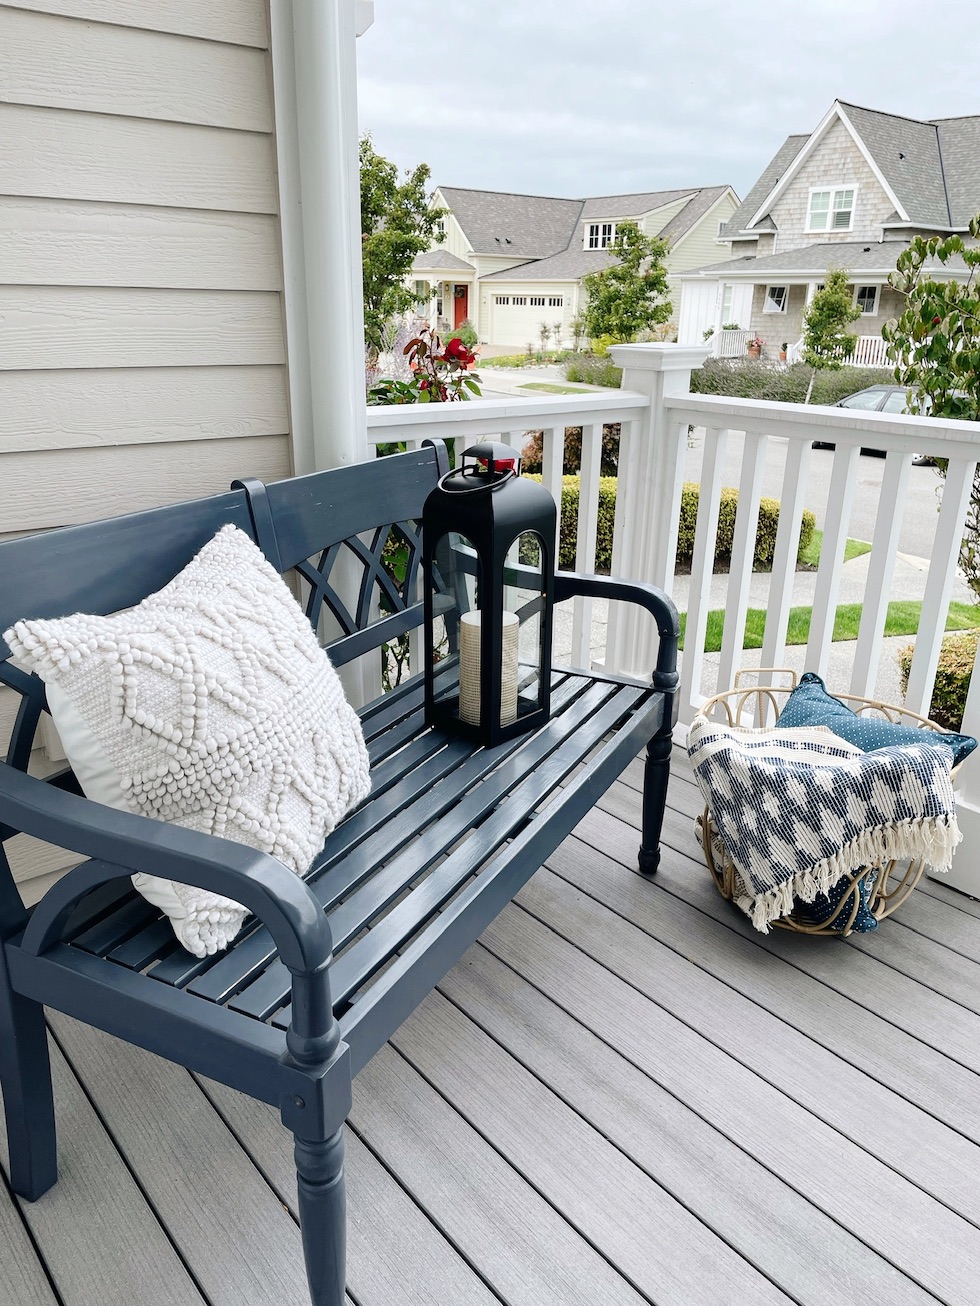 My Outdoor Furniture, Patio Umbrellas, Rugs and More